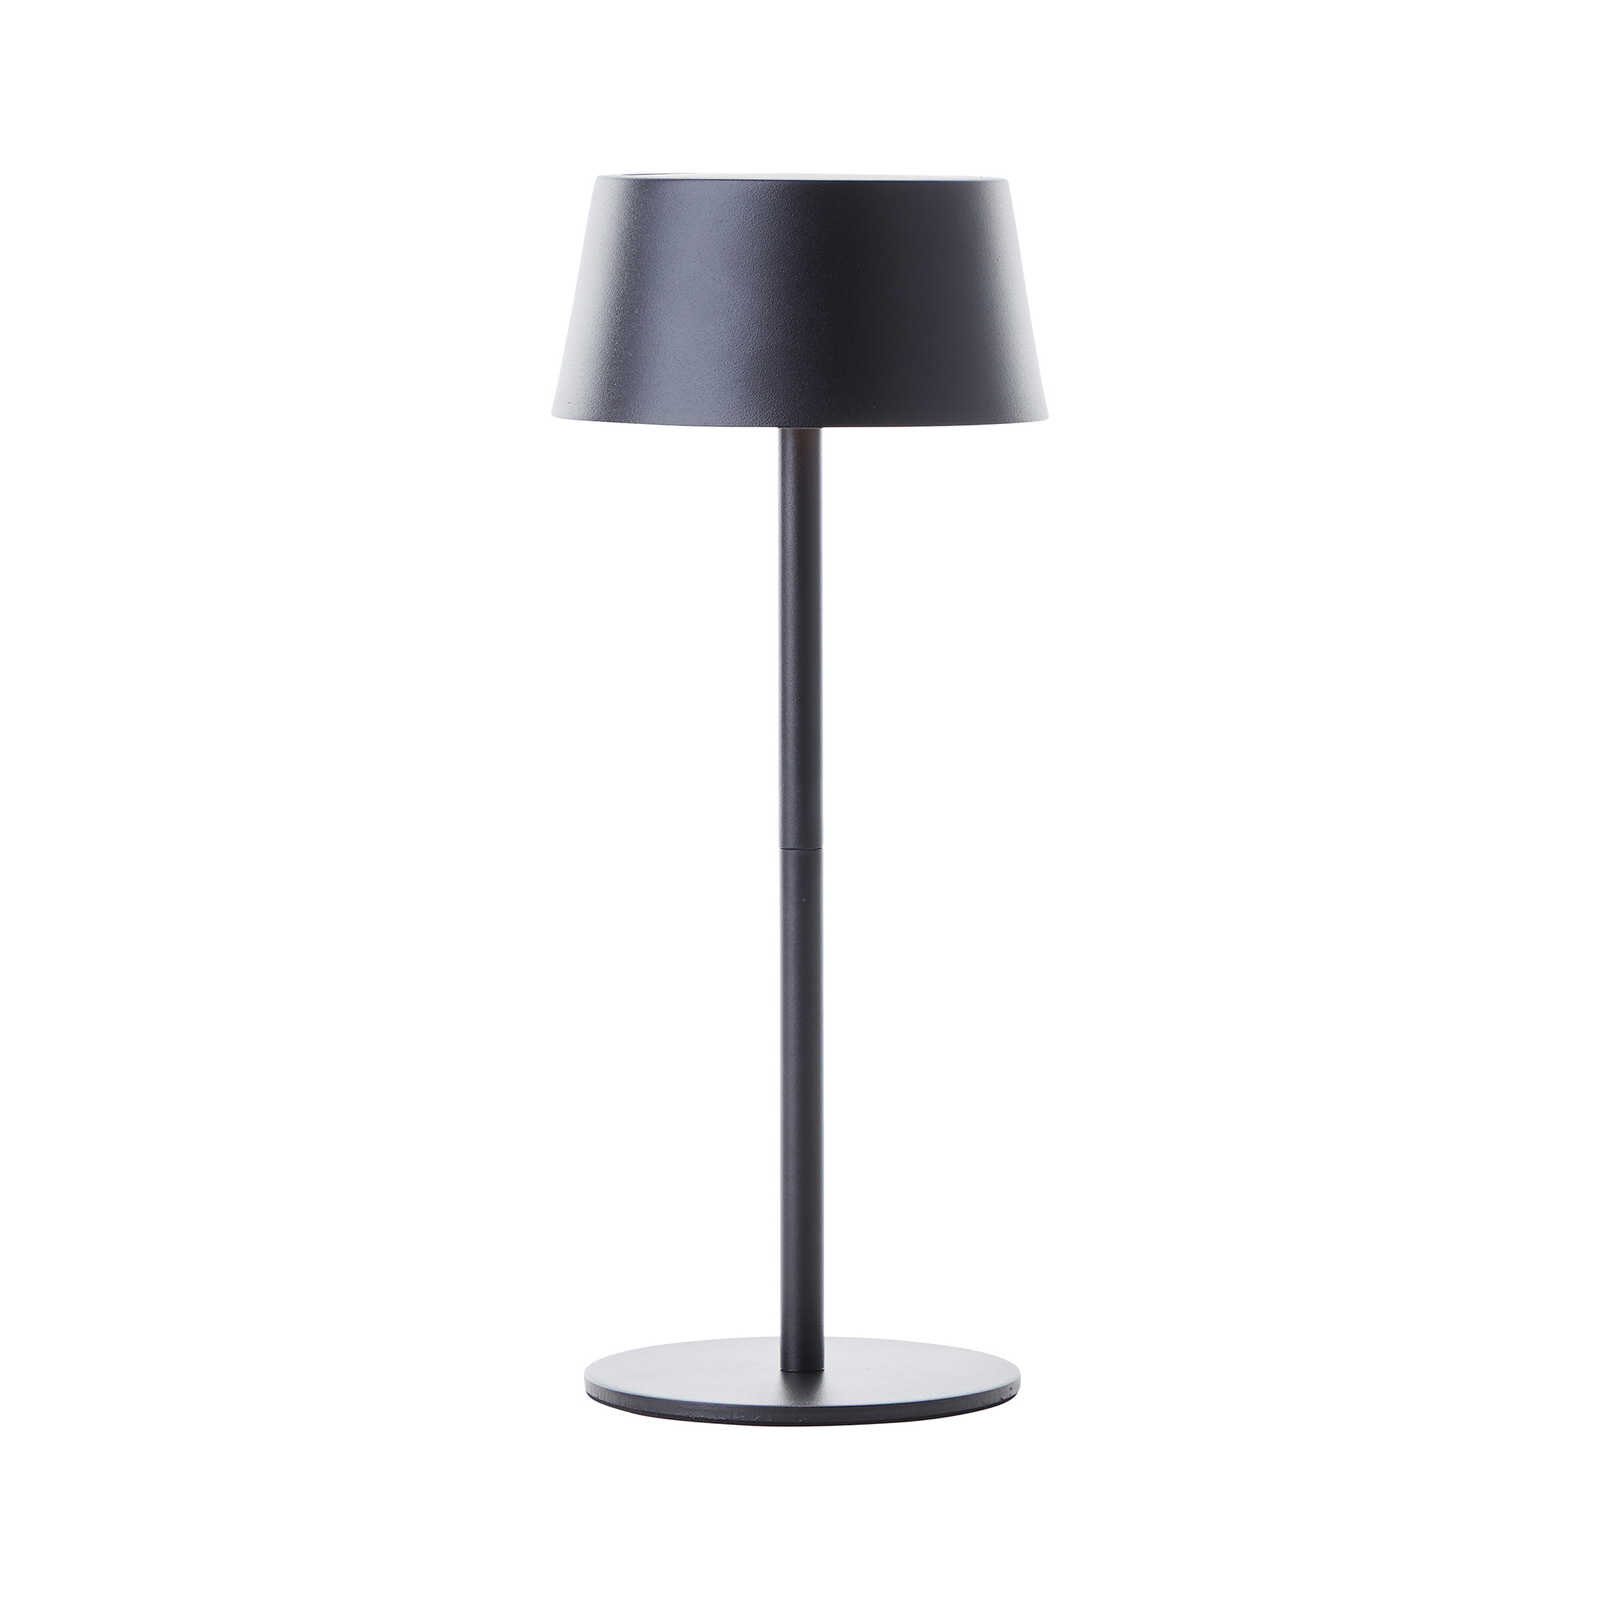 Metal table lamp - Outy 3 - Black
